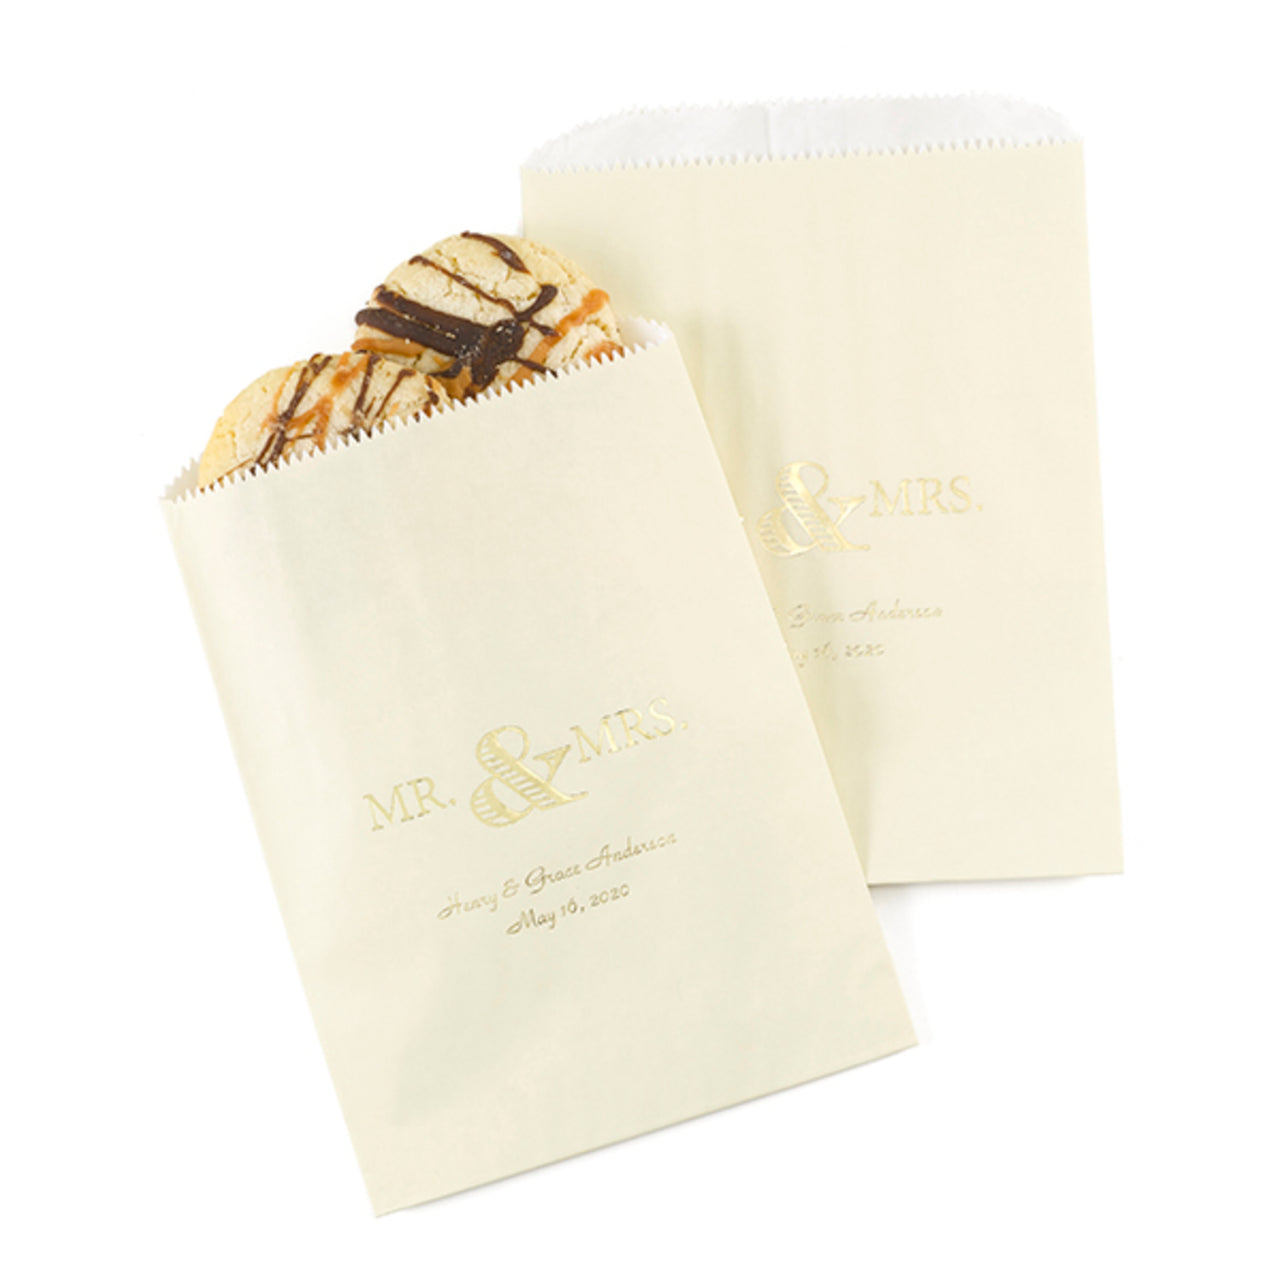 Personalized Mr. & Mrs. Treat Bags (Available in Multiple Colors) (Set of 50) - Alternate Image 4 | My Wedding Favors